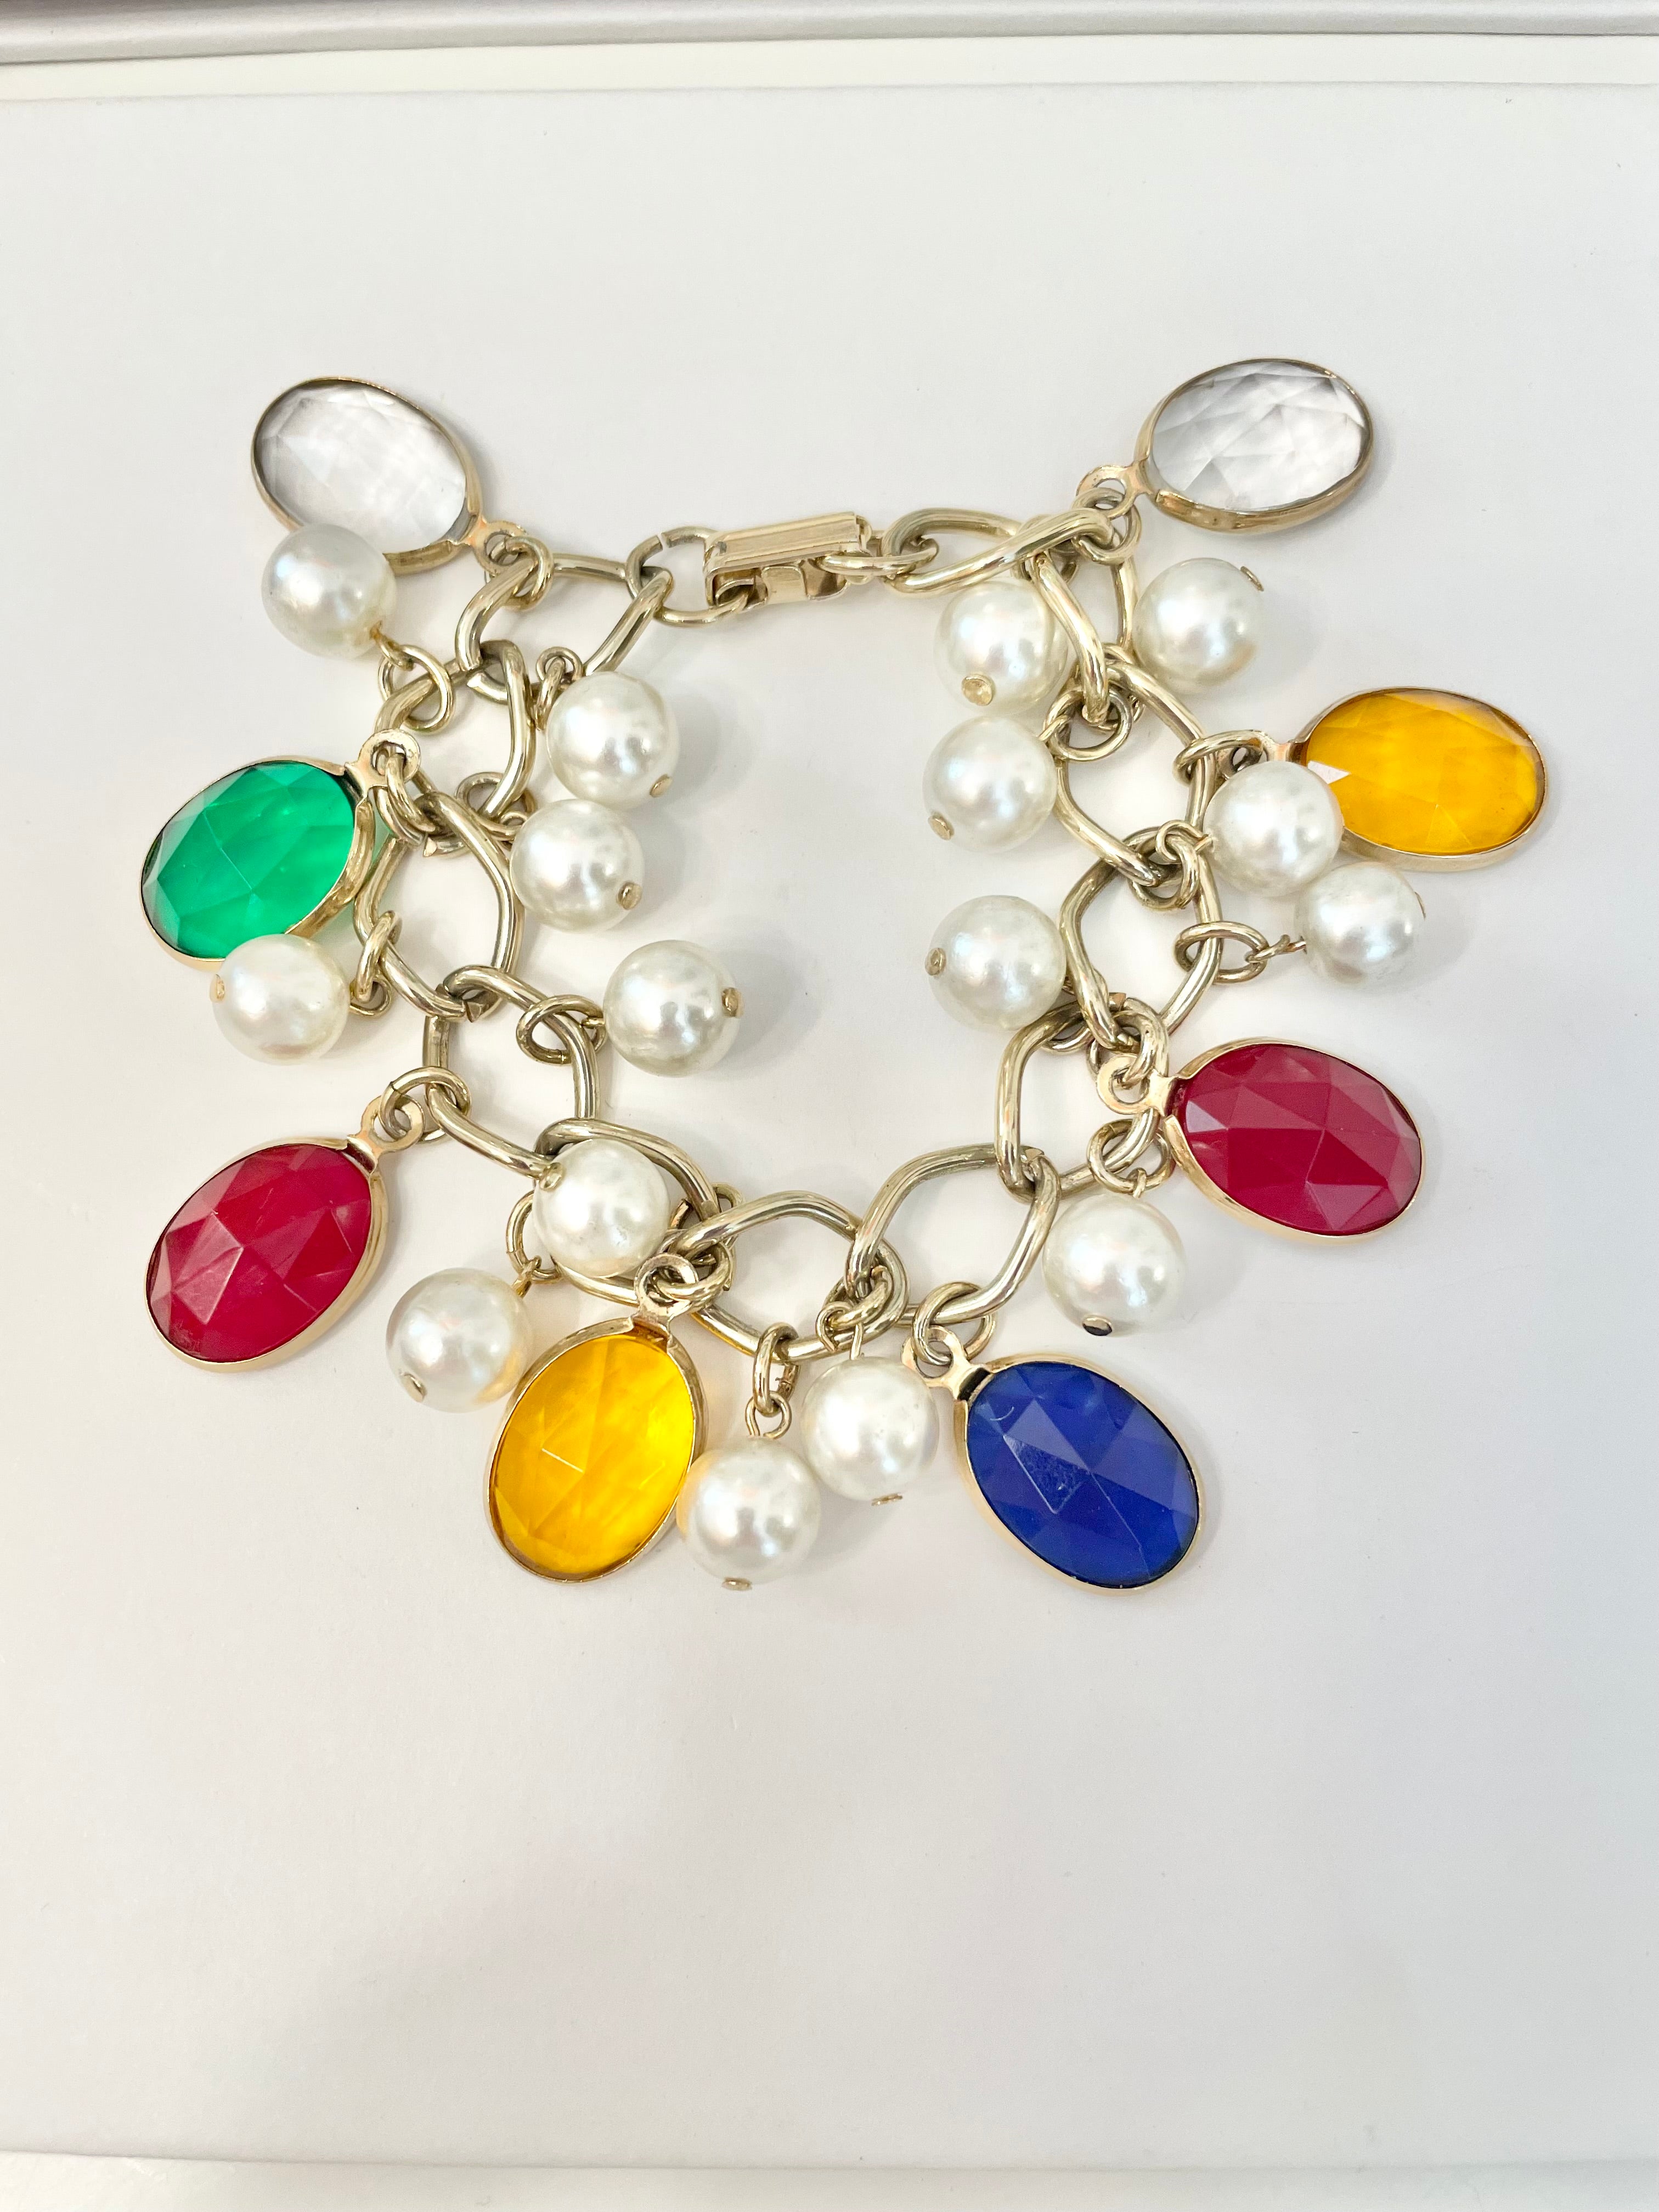 The most charming, colorful bracelet... so chic